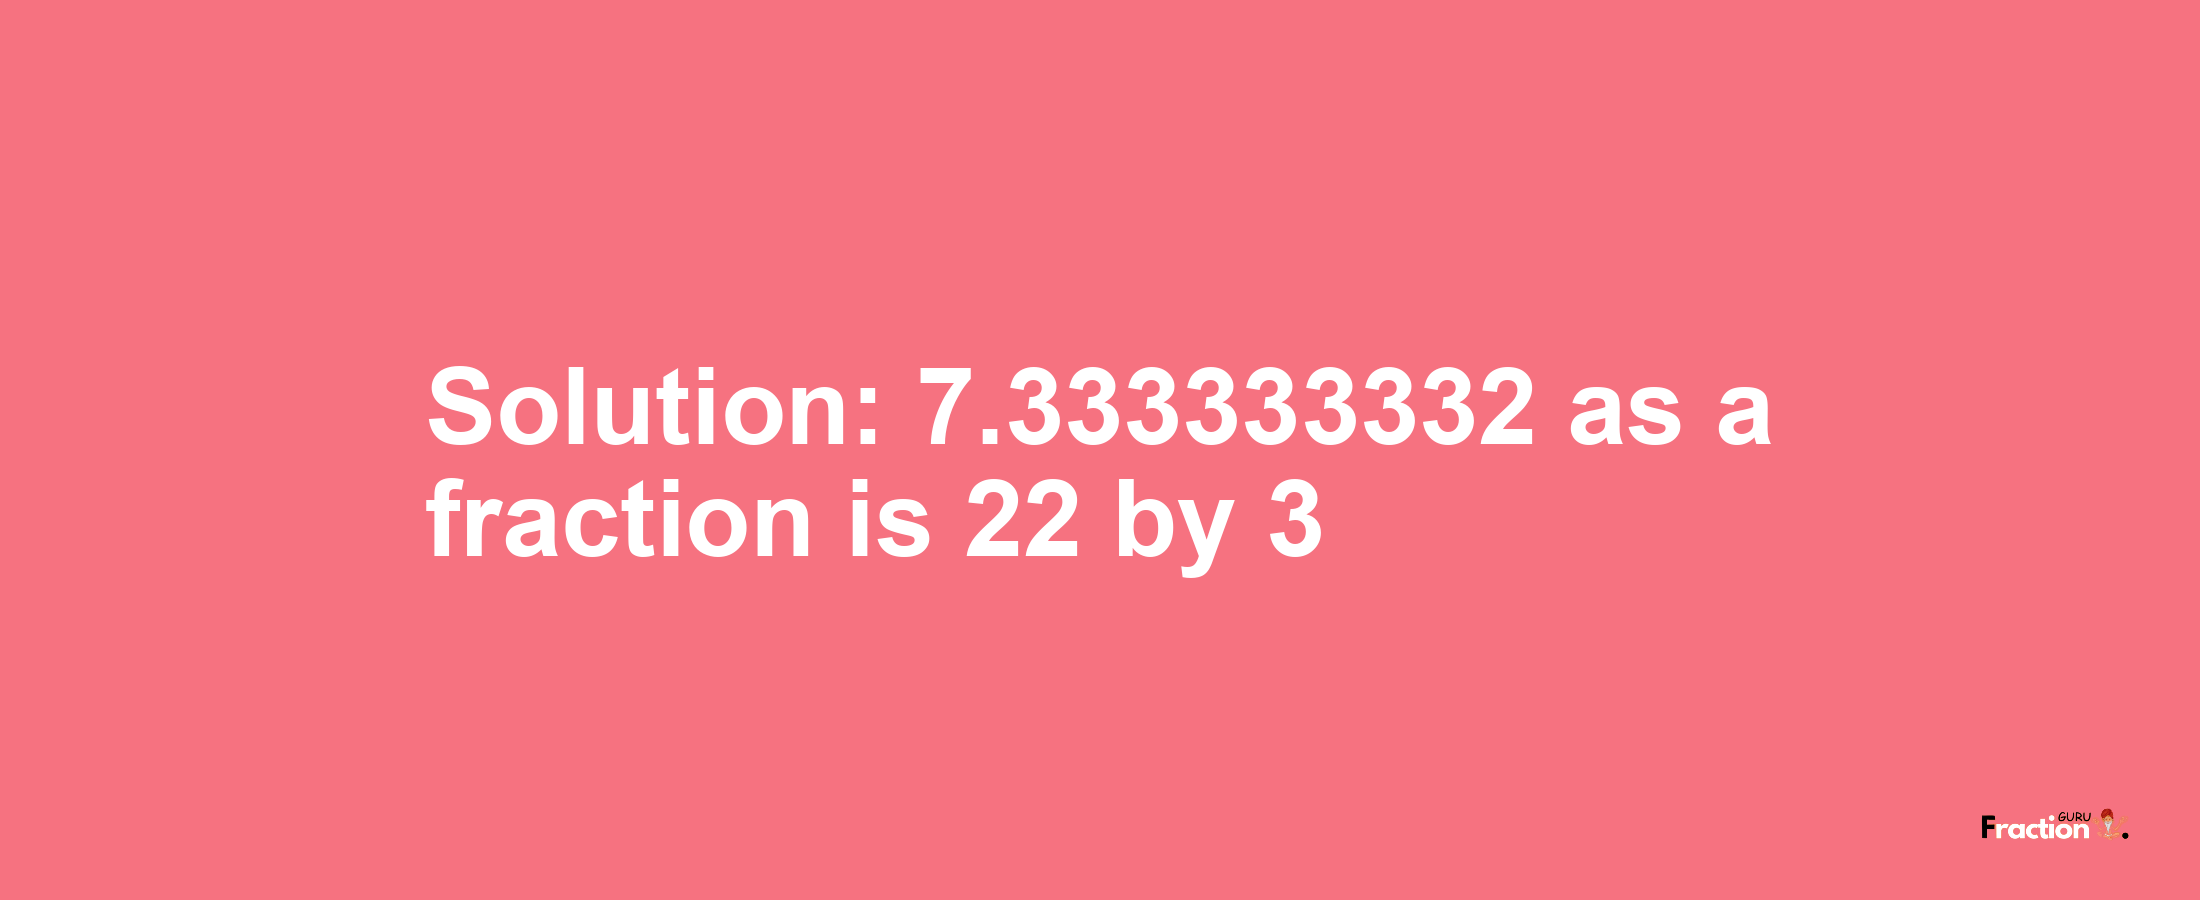 Solution:7.333333332 as a fraction is 22/3